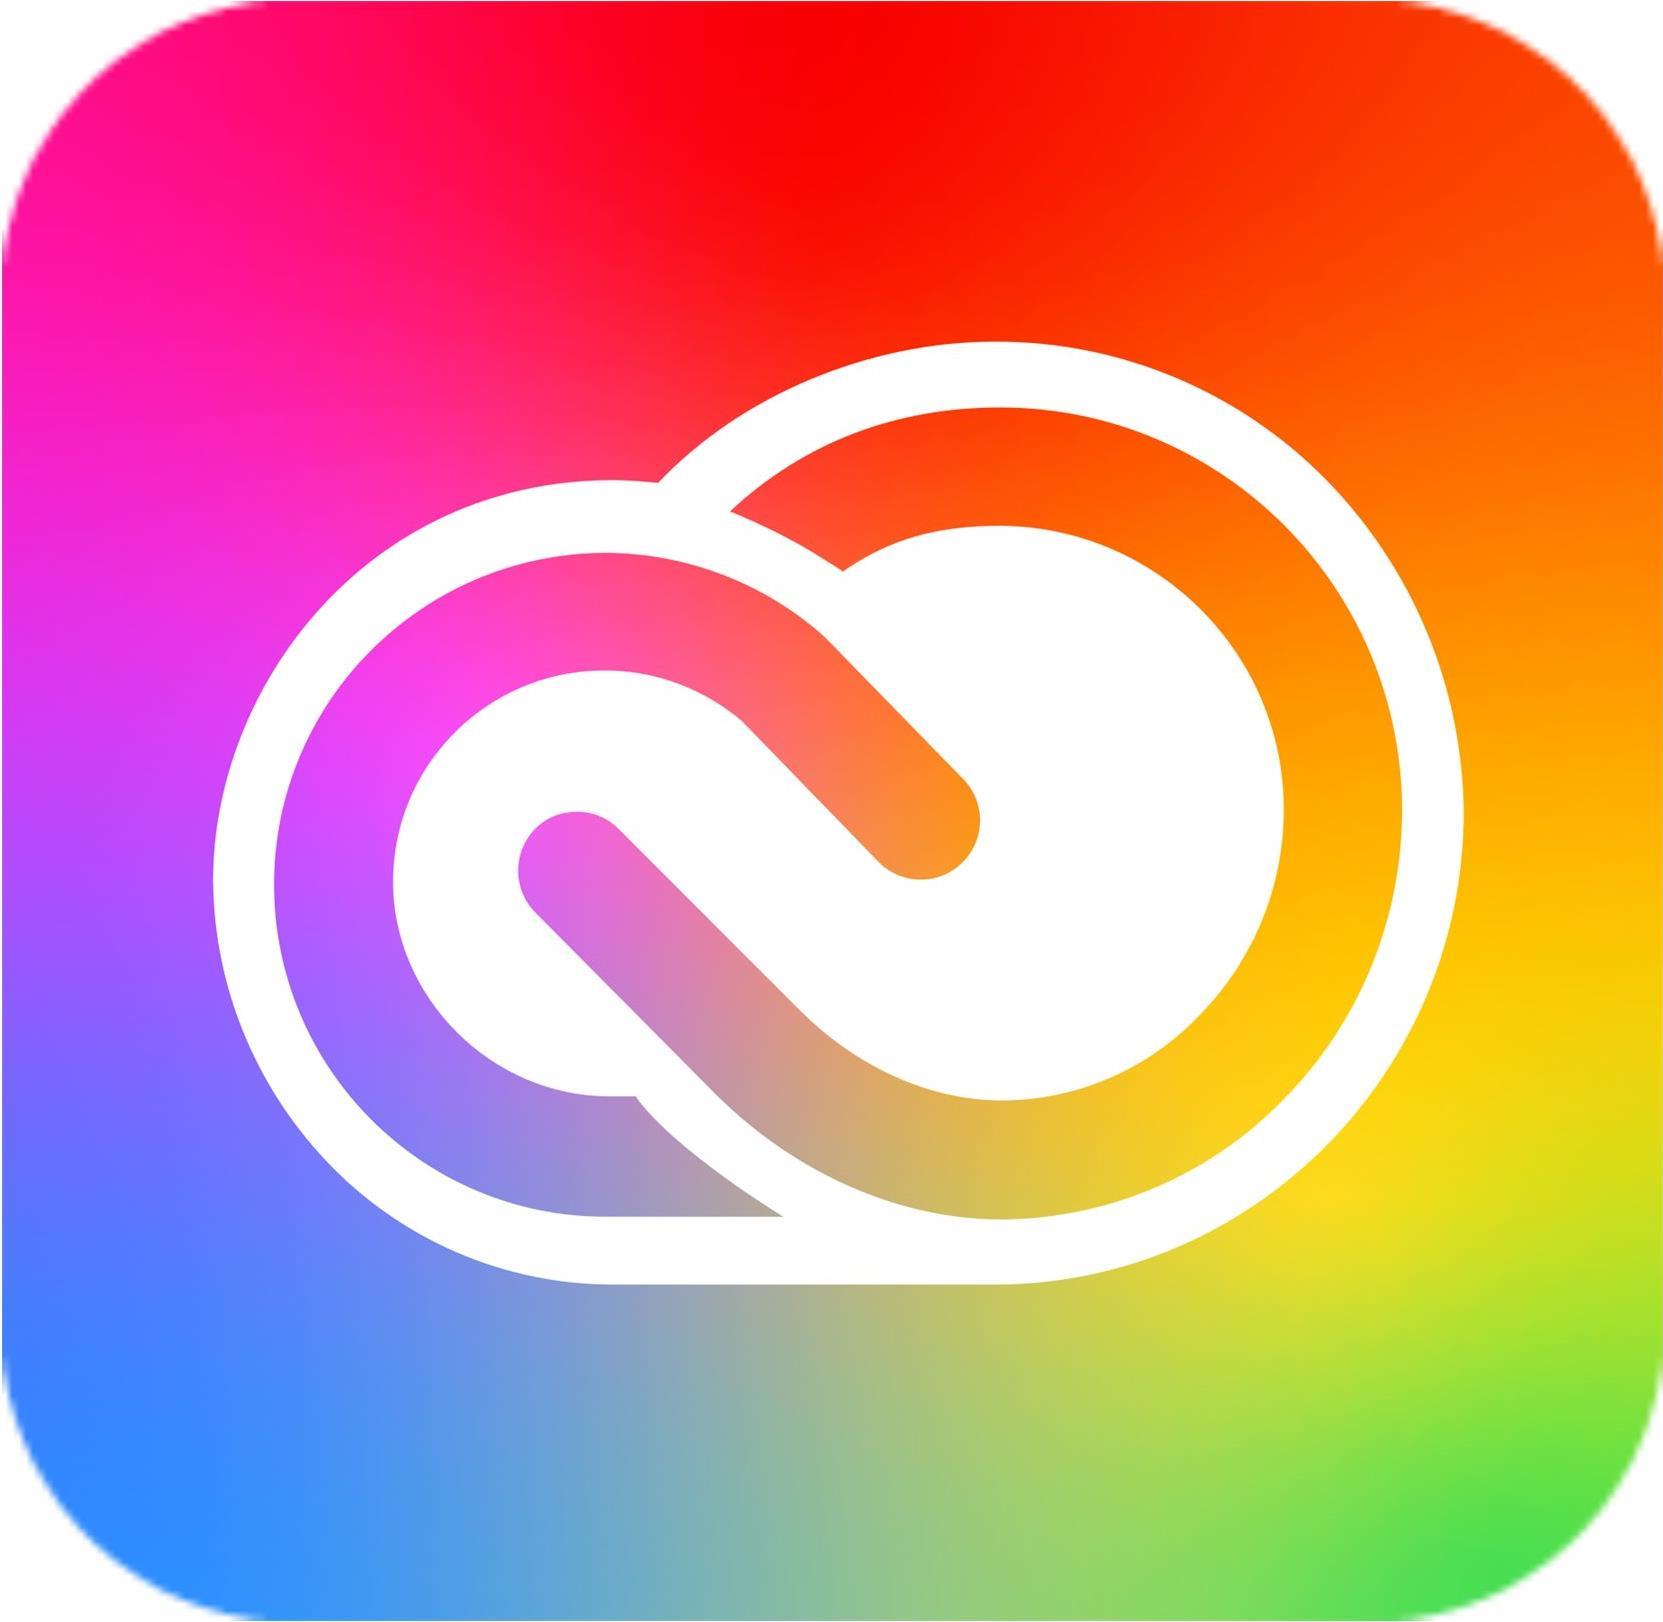 Adobe Creative Cloud for Enterprise - All Apps - Subscription Renewal - 1 Benutzer - VIP Select - Stufe 13 (50-99) - 3 years commitment - Win, Mac - Multi European Languages von Adobe